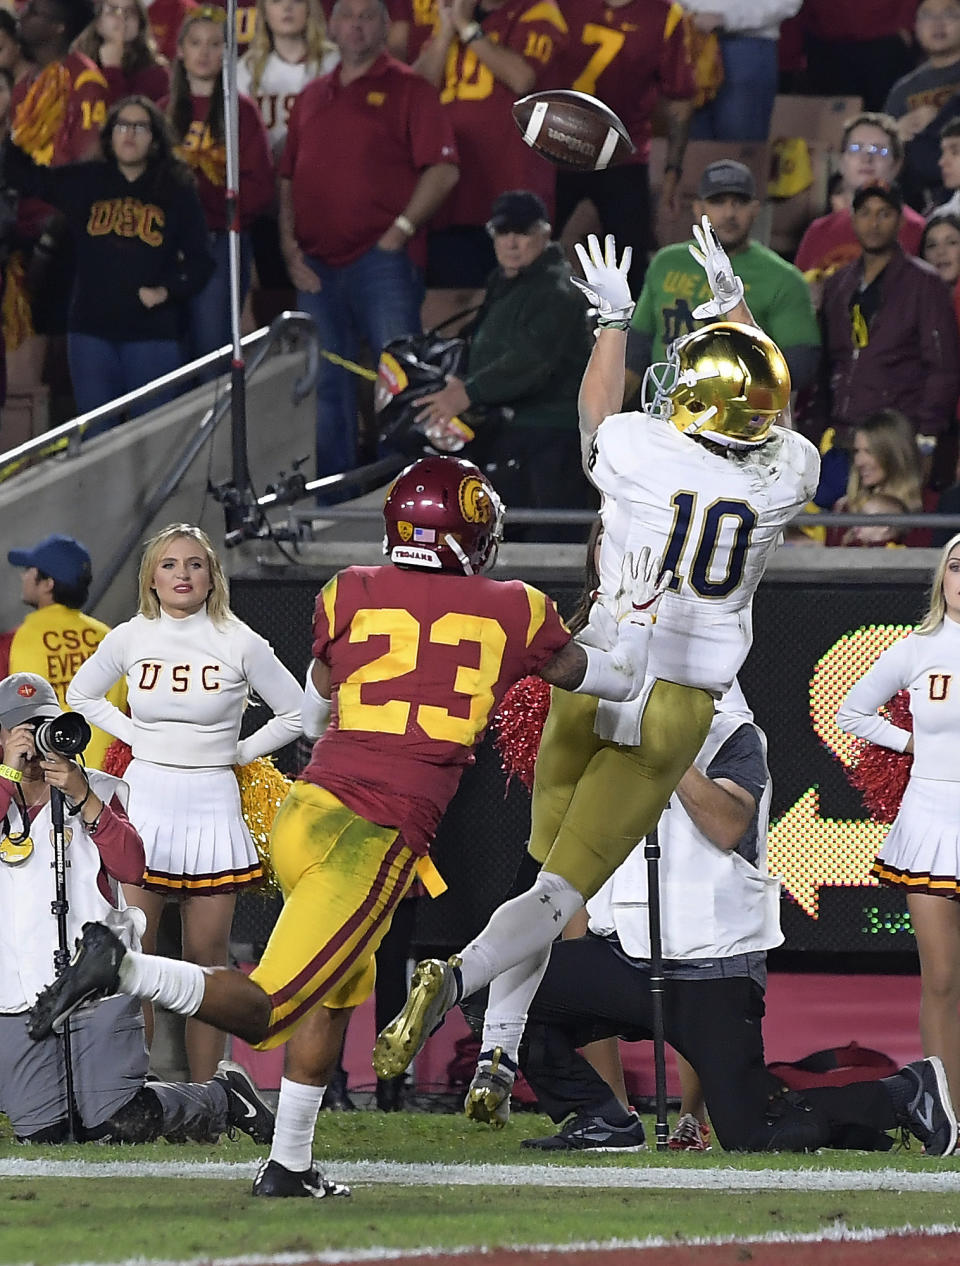 Notre Dame wide receiver Chris Finke, right, makes a touchdown catch as Southern California cornerback Jonathan Lockett defends during the first half of an NCAA college football game Saturday, Nov. 24, 2018, in Los Angeles. (AP Photo/Mark J. Terrill)